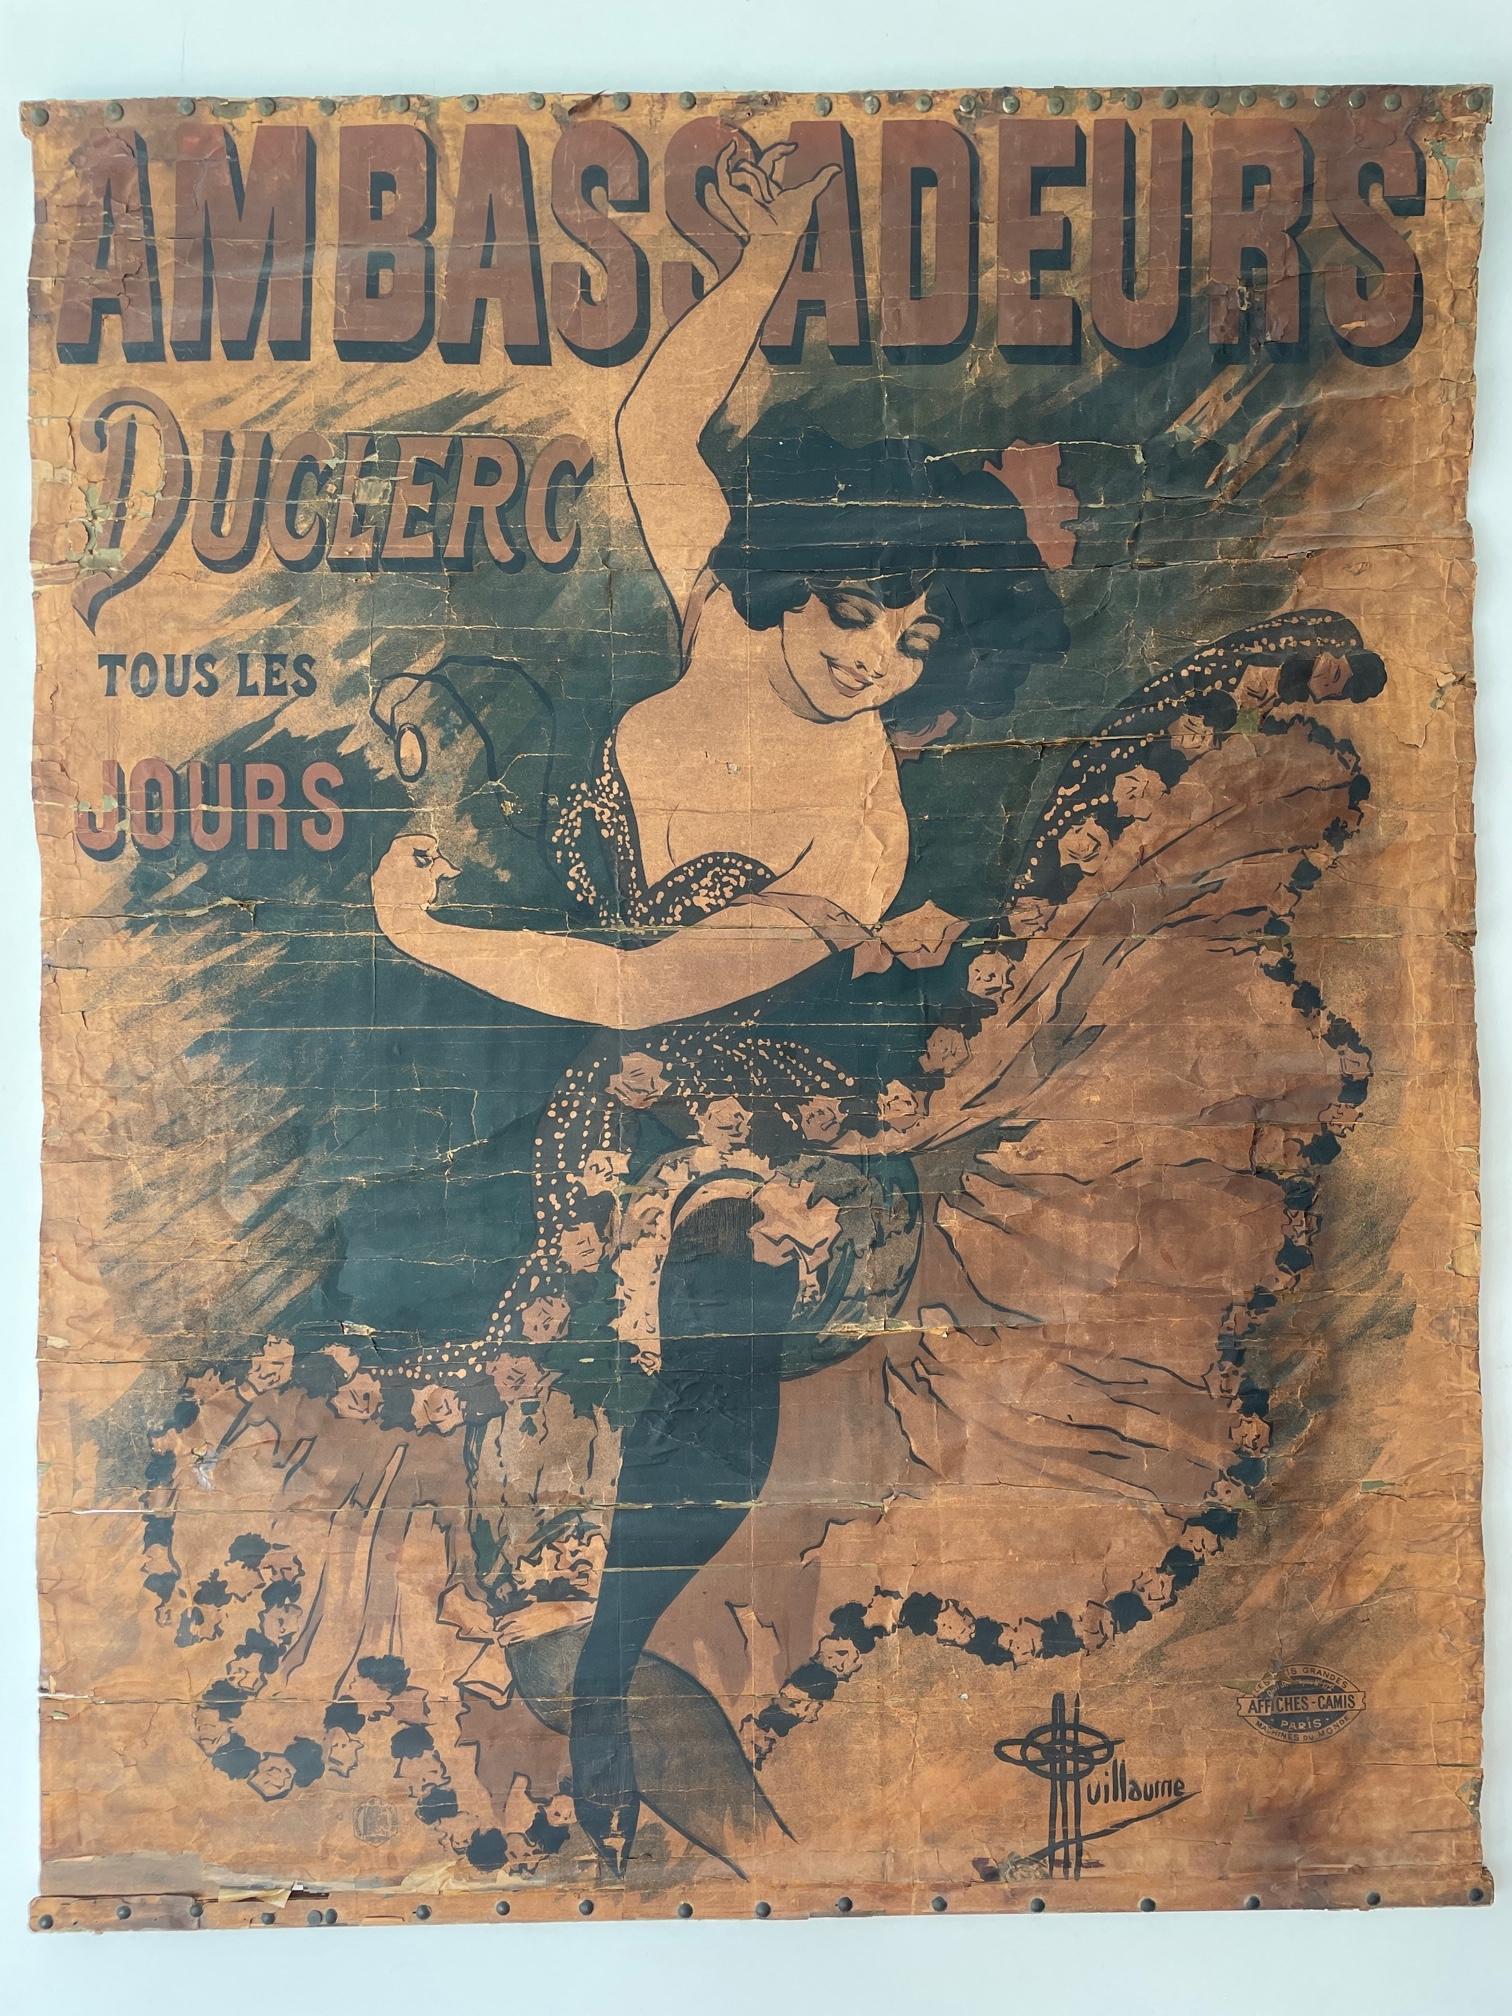 What. An. Item! This poster is made in the 1890's. To be more specific in 1894. This is an original piece. Absolute rare. It is over 120 years old. A must have for collectors of this kind of prints/posters/affiches. The poster is really fragile and